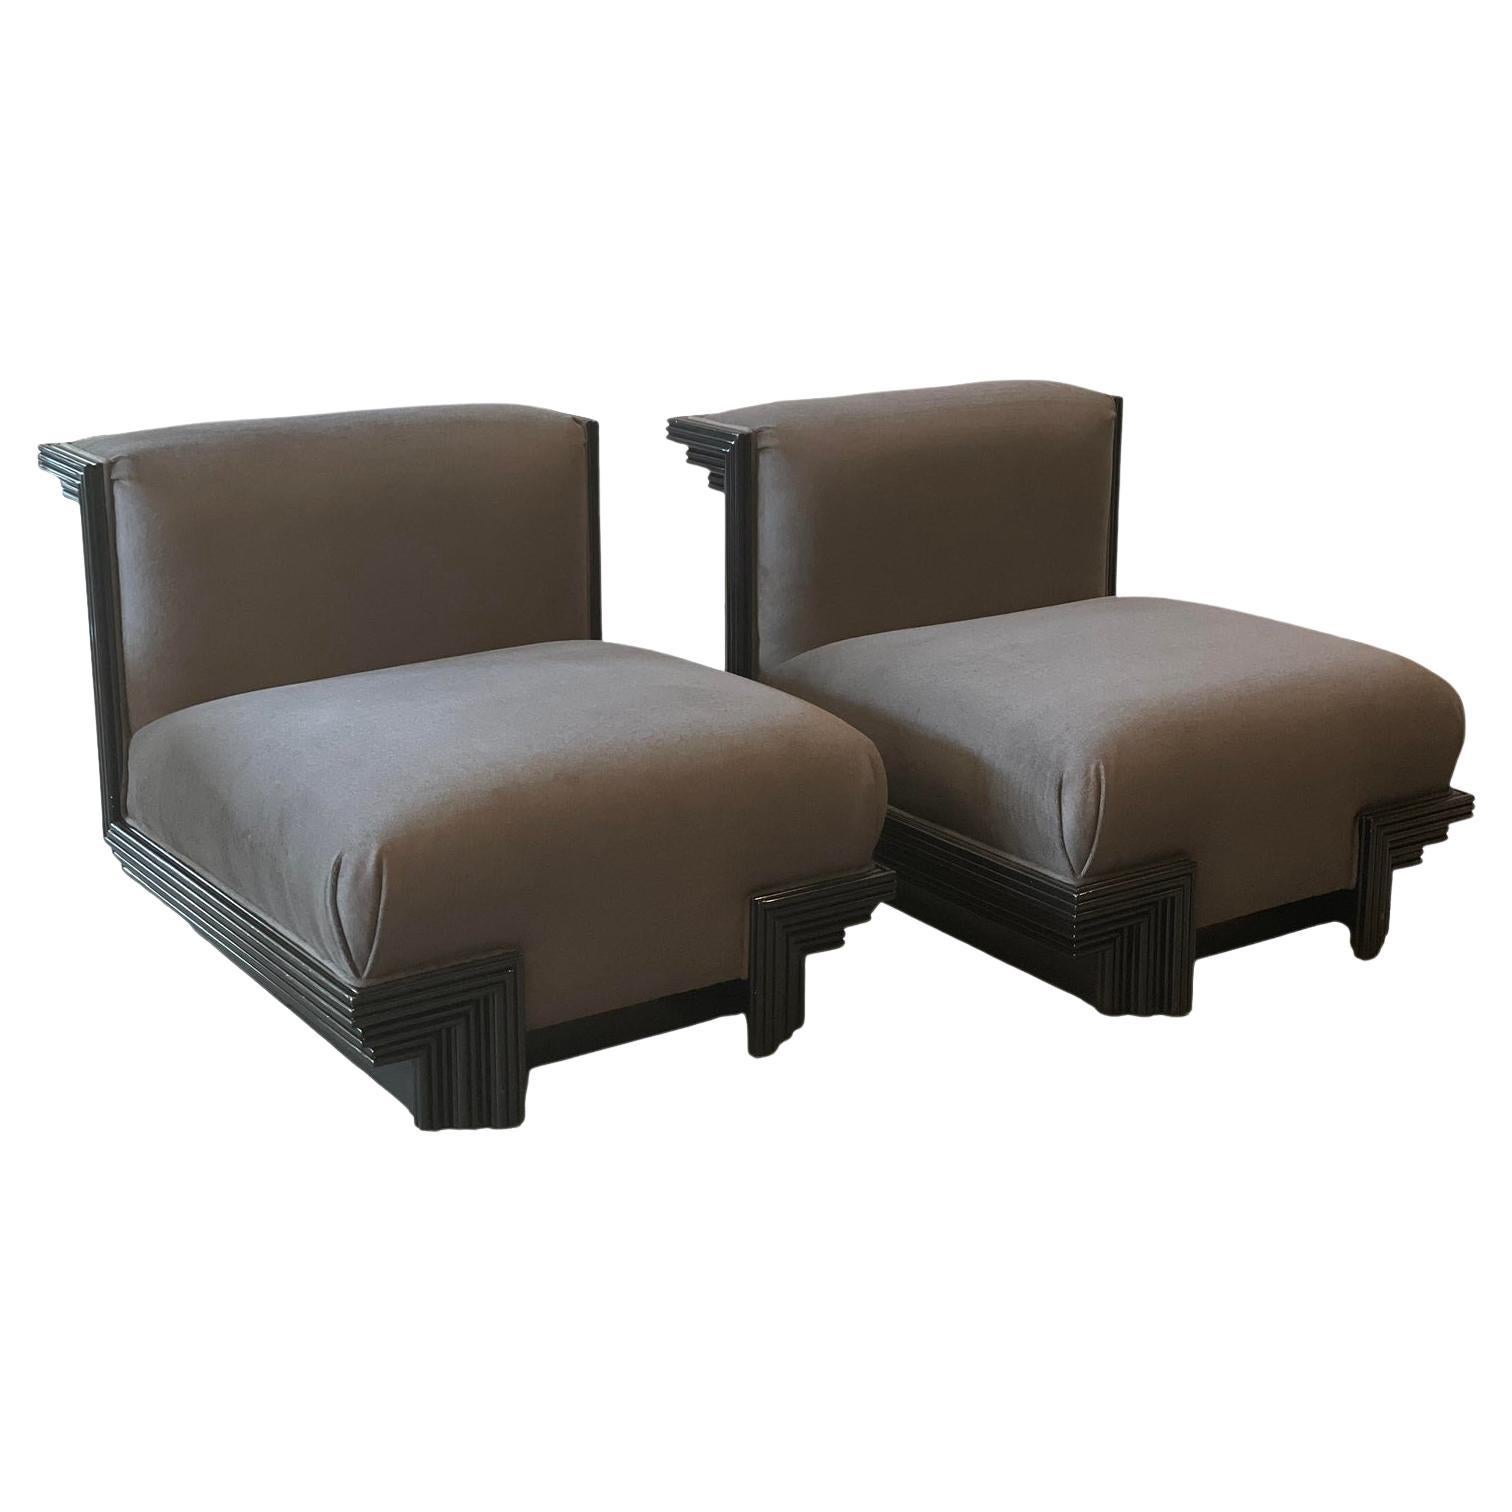 1970s Modern Slipper Chairs in the Manner of James Mont, a Pair